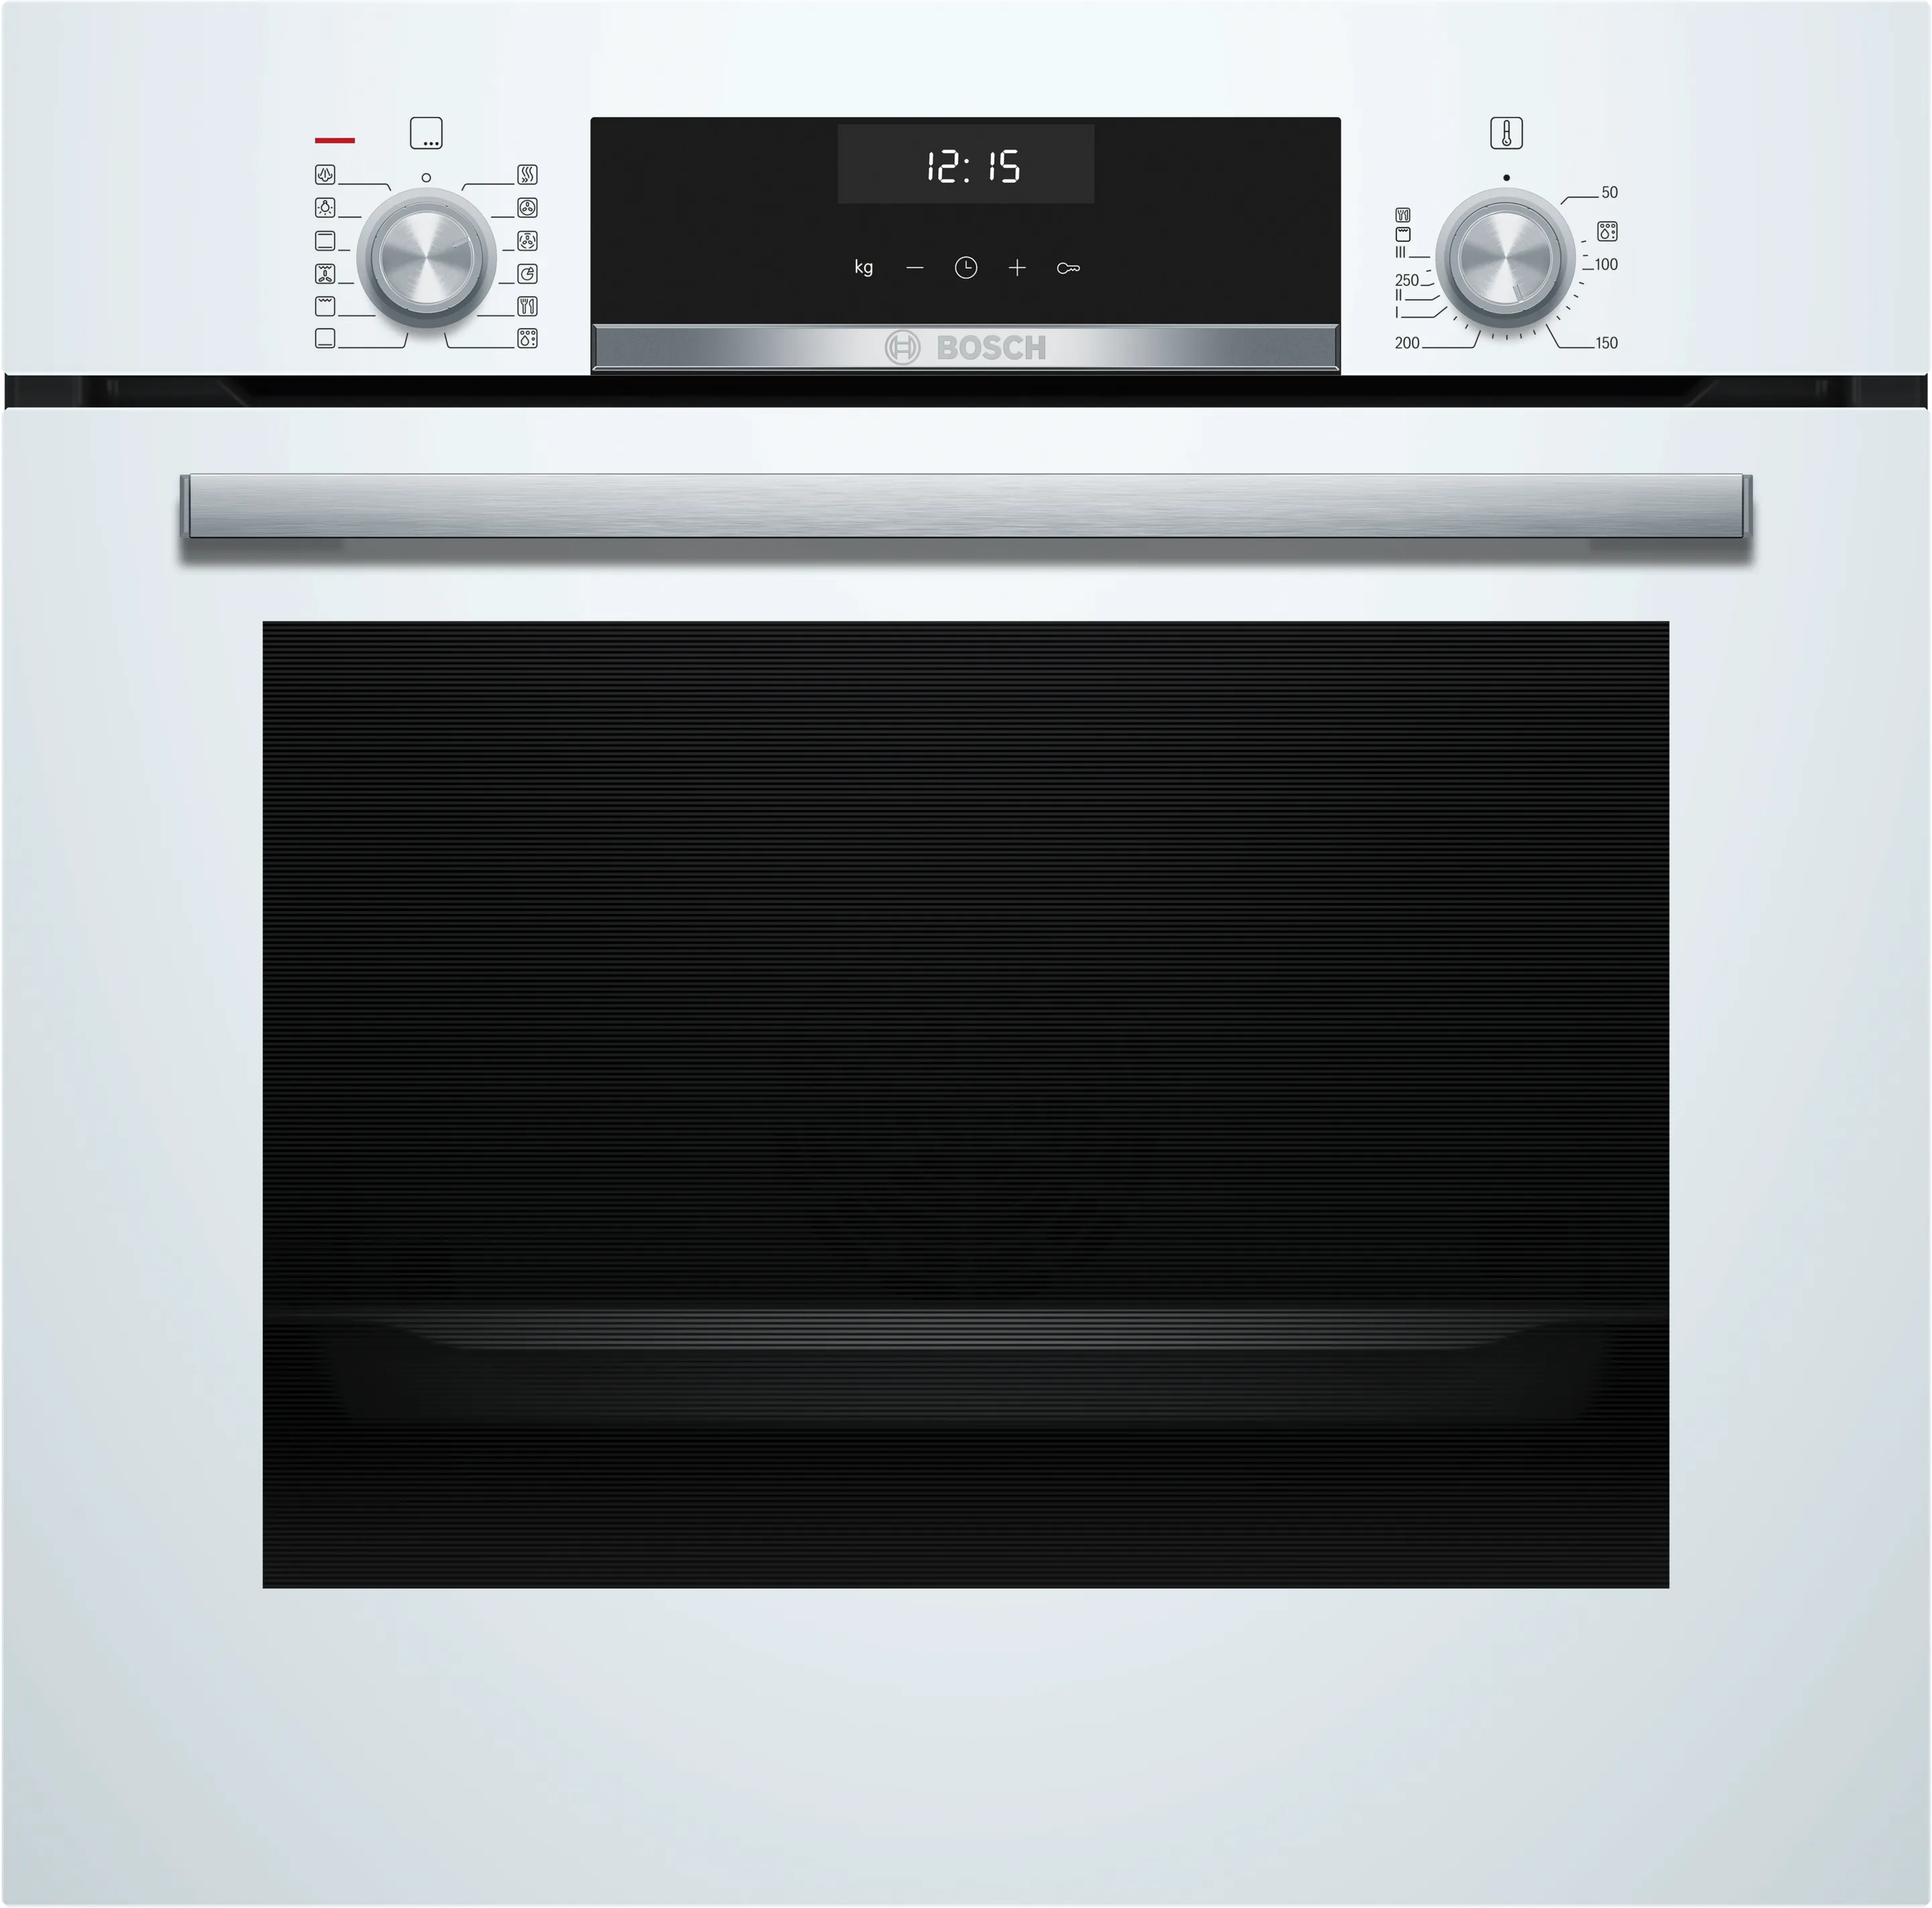 Series 6 Built-in oven with added steam function 60 x 60 cm White 